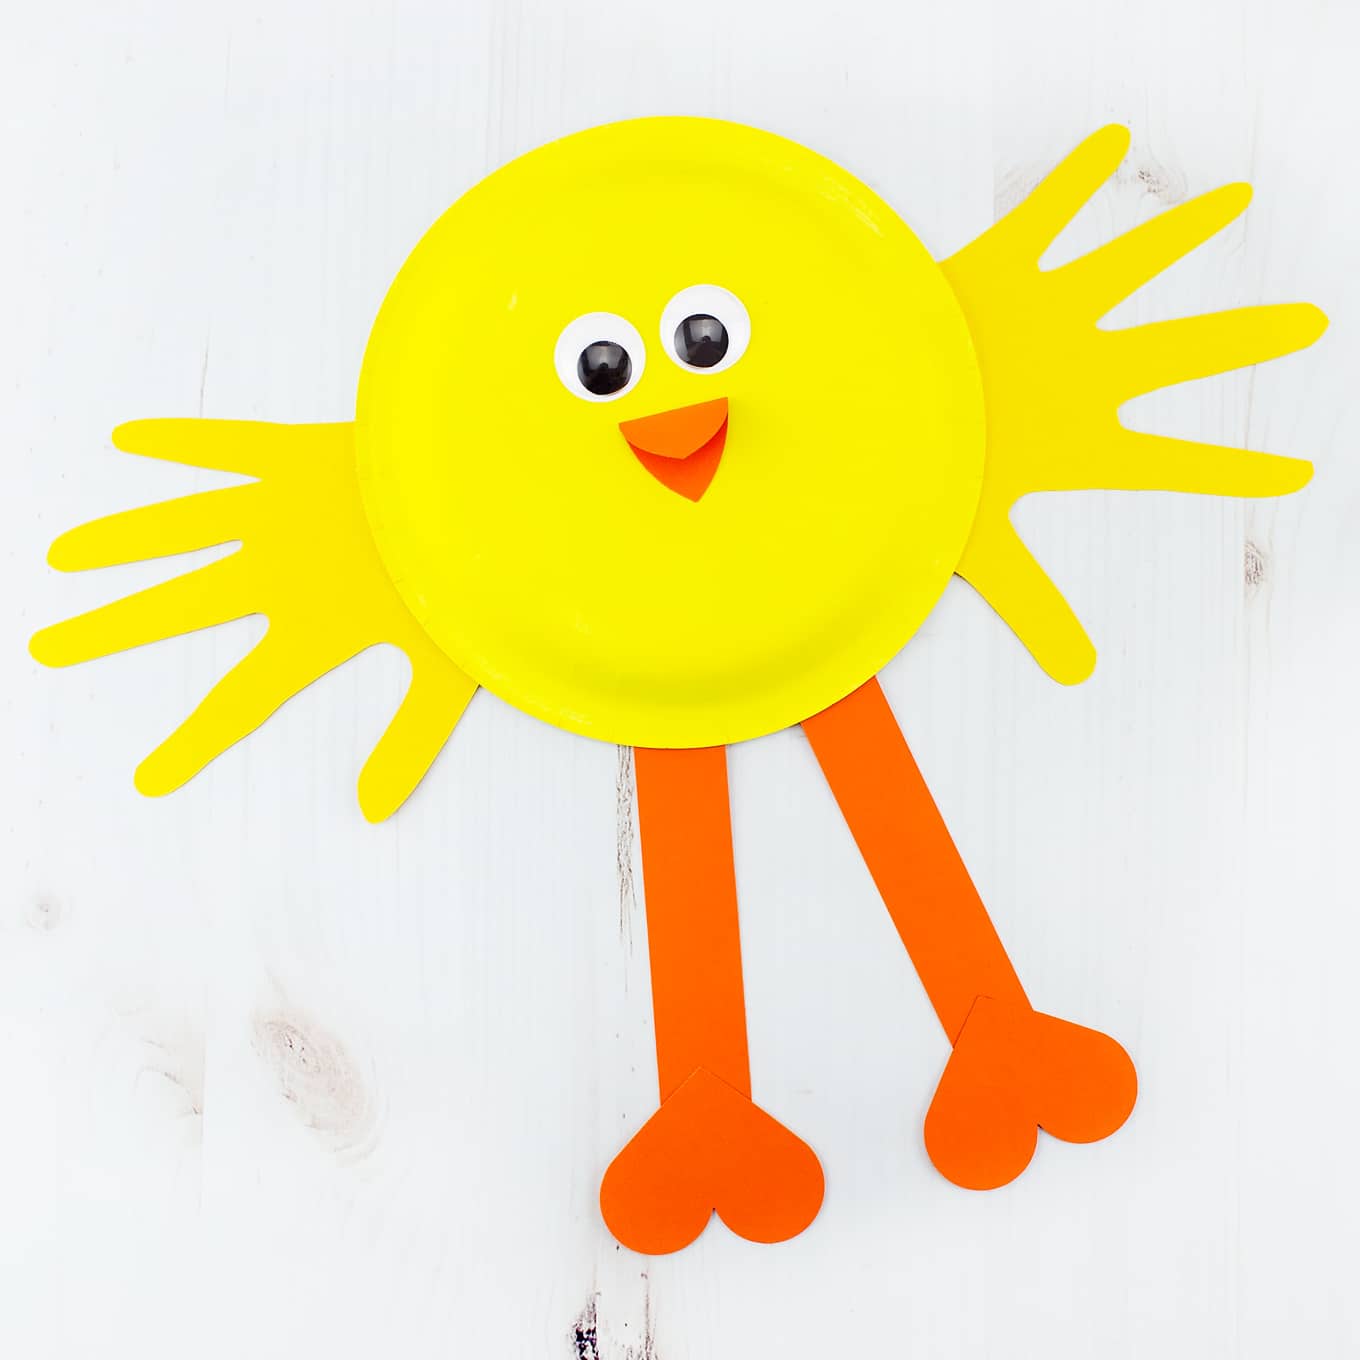 How to Make a Paper Plate Chick Craft